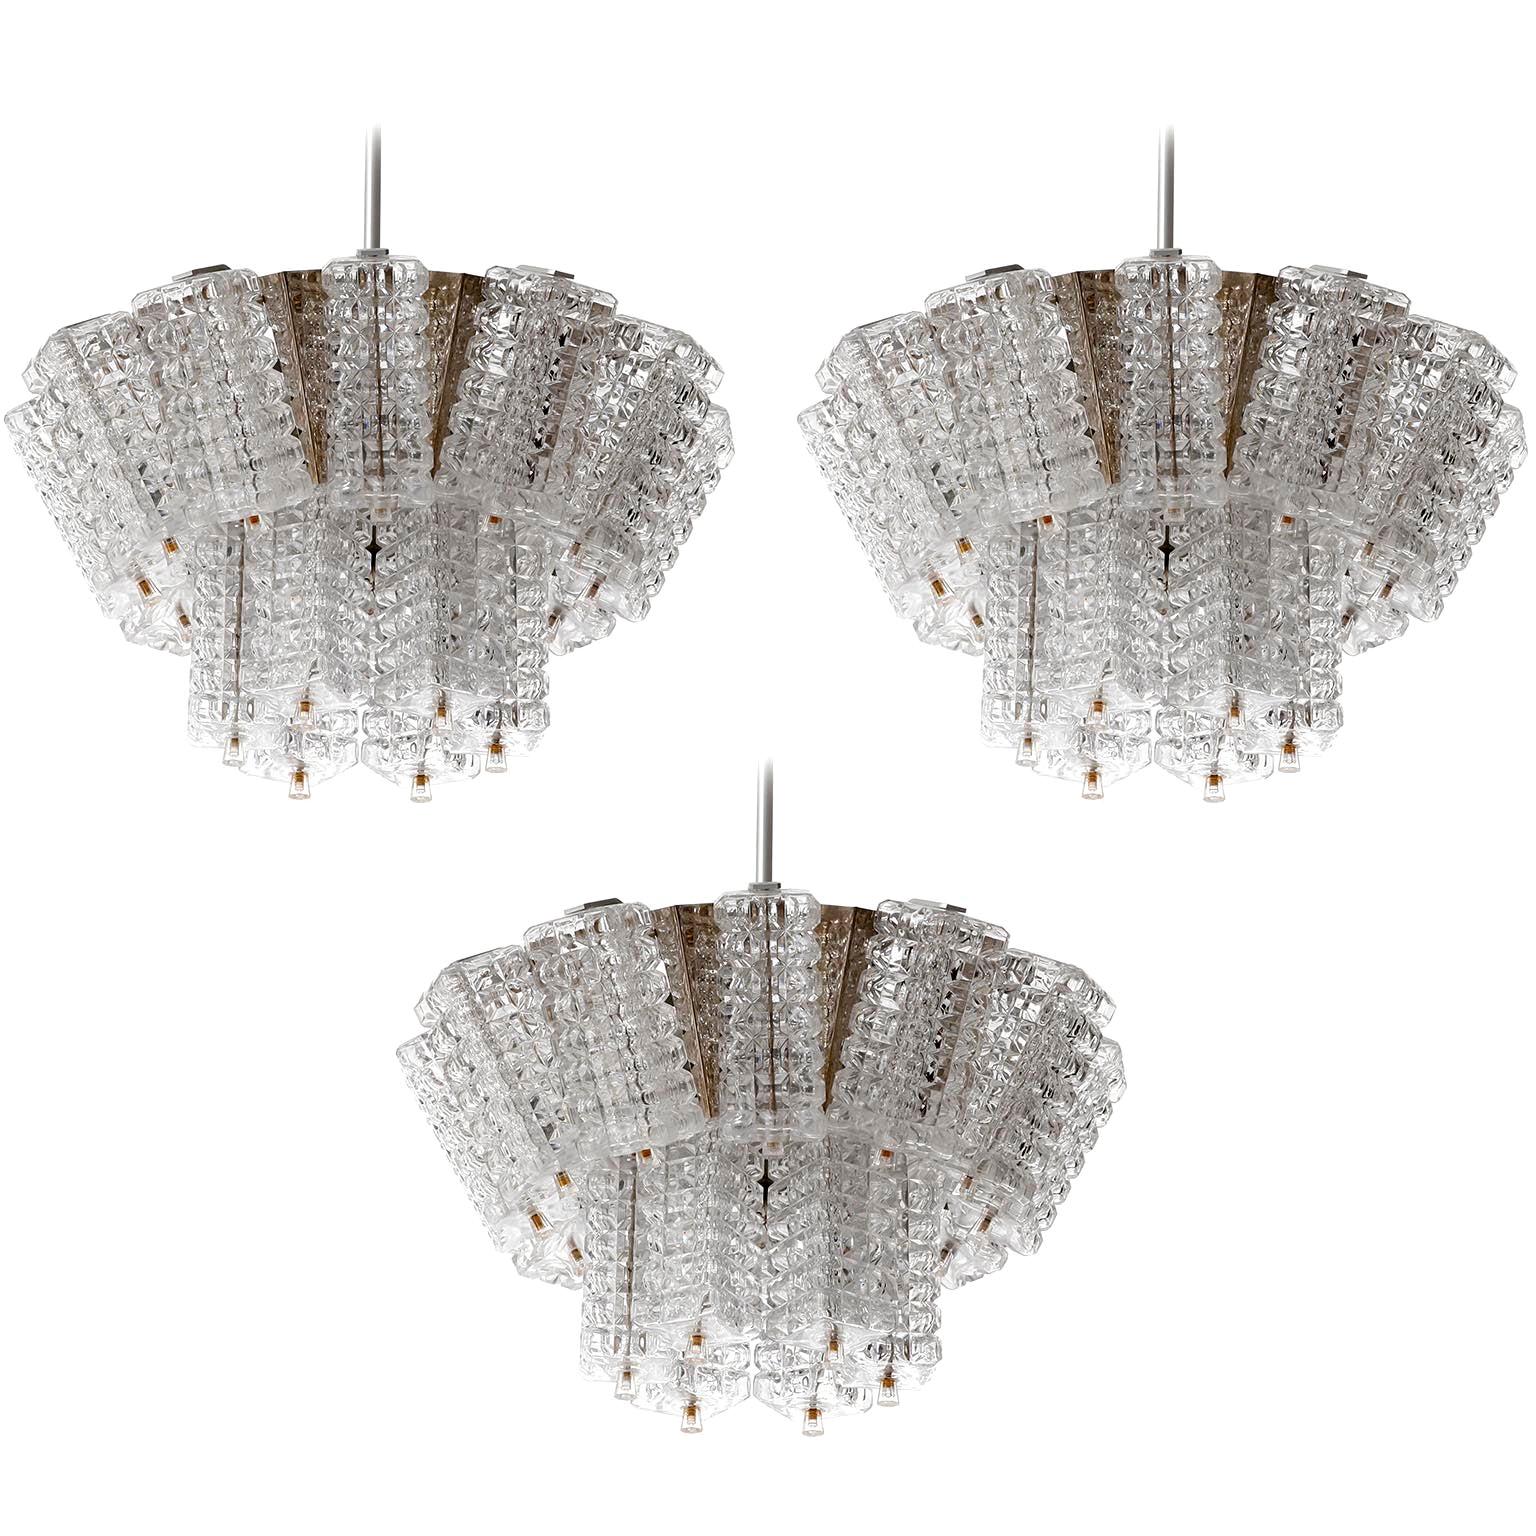 One of Three Chandeliers Pendant Lights by Austrolux, Chrome Glass, Austria 1960